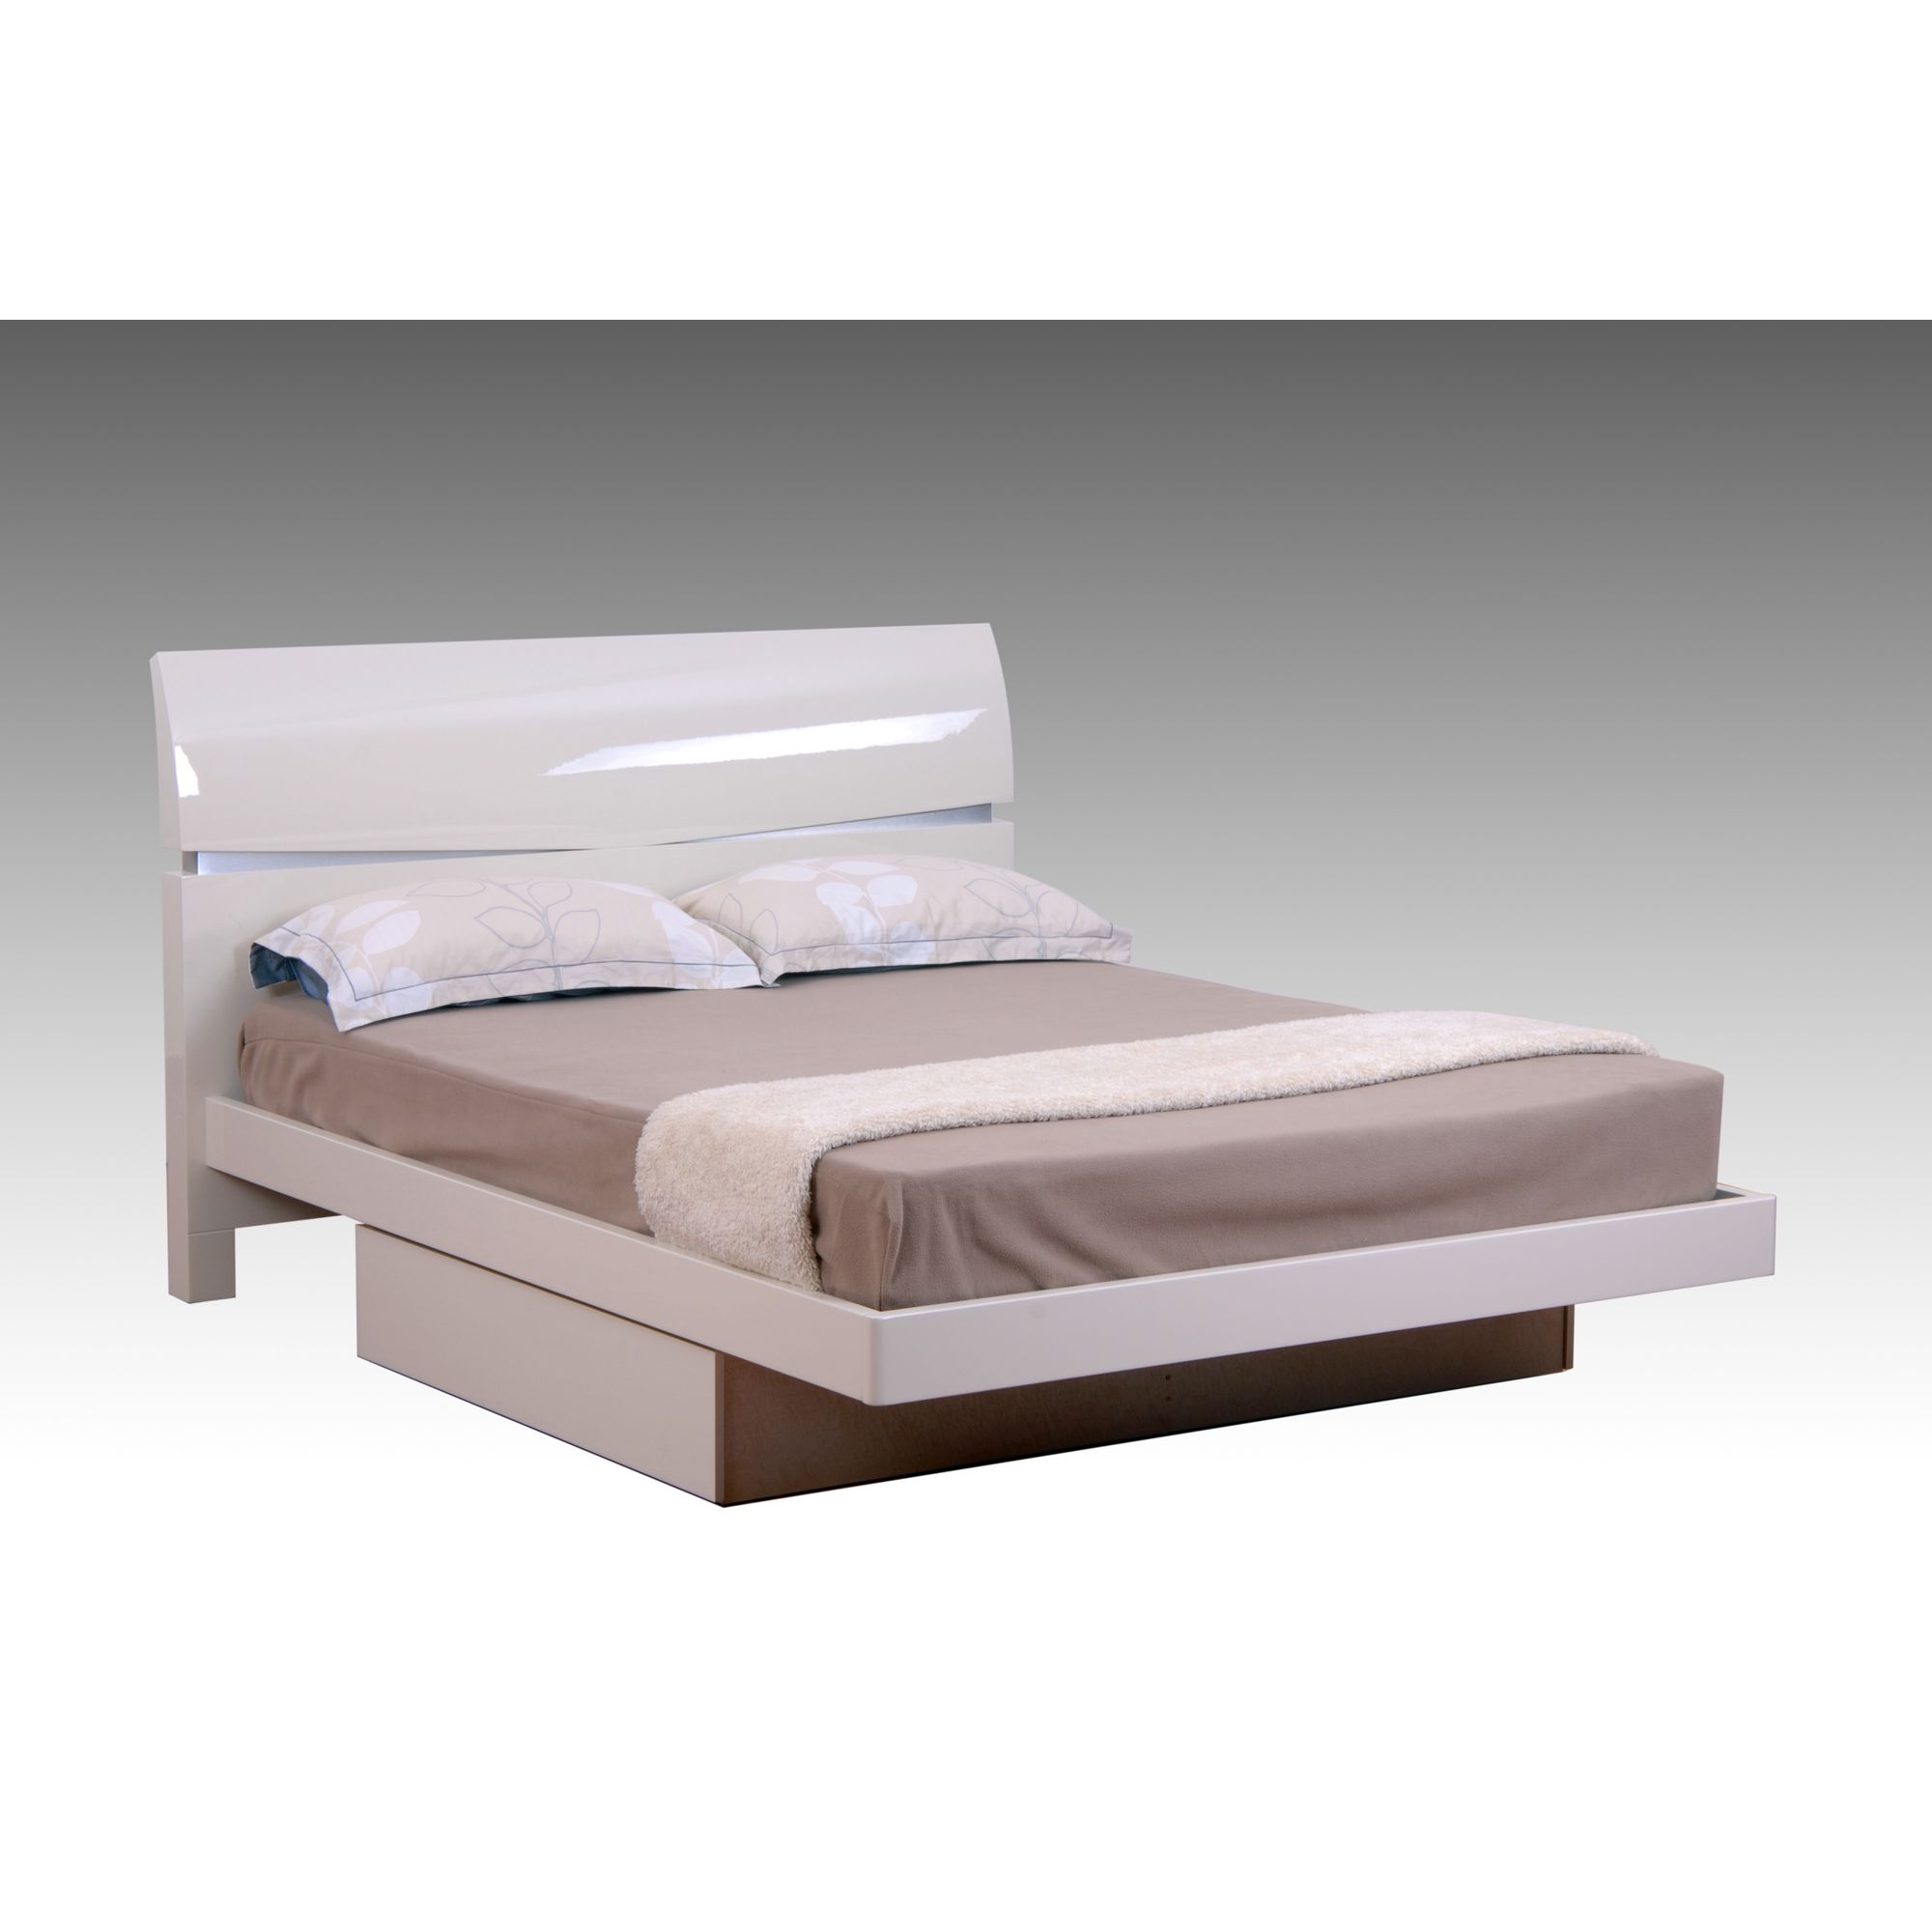 Elements Isabel Bed with Drawers - king at Tesco Direct